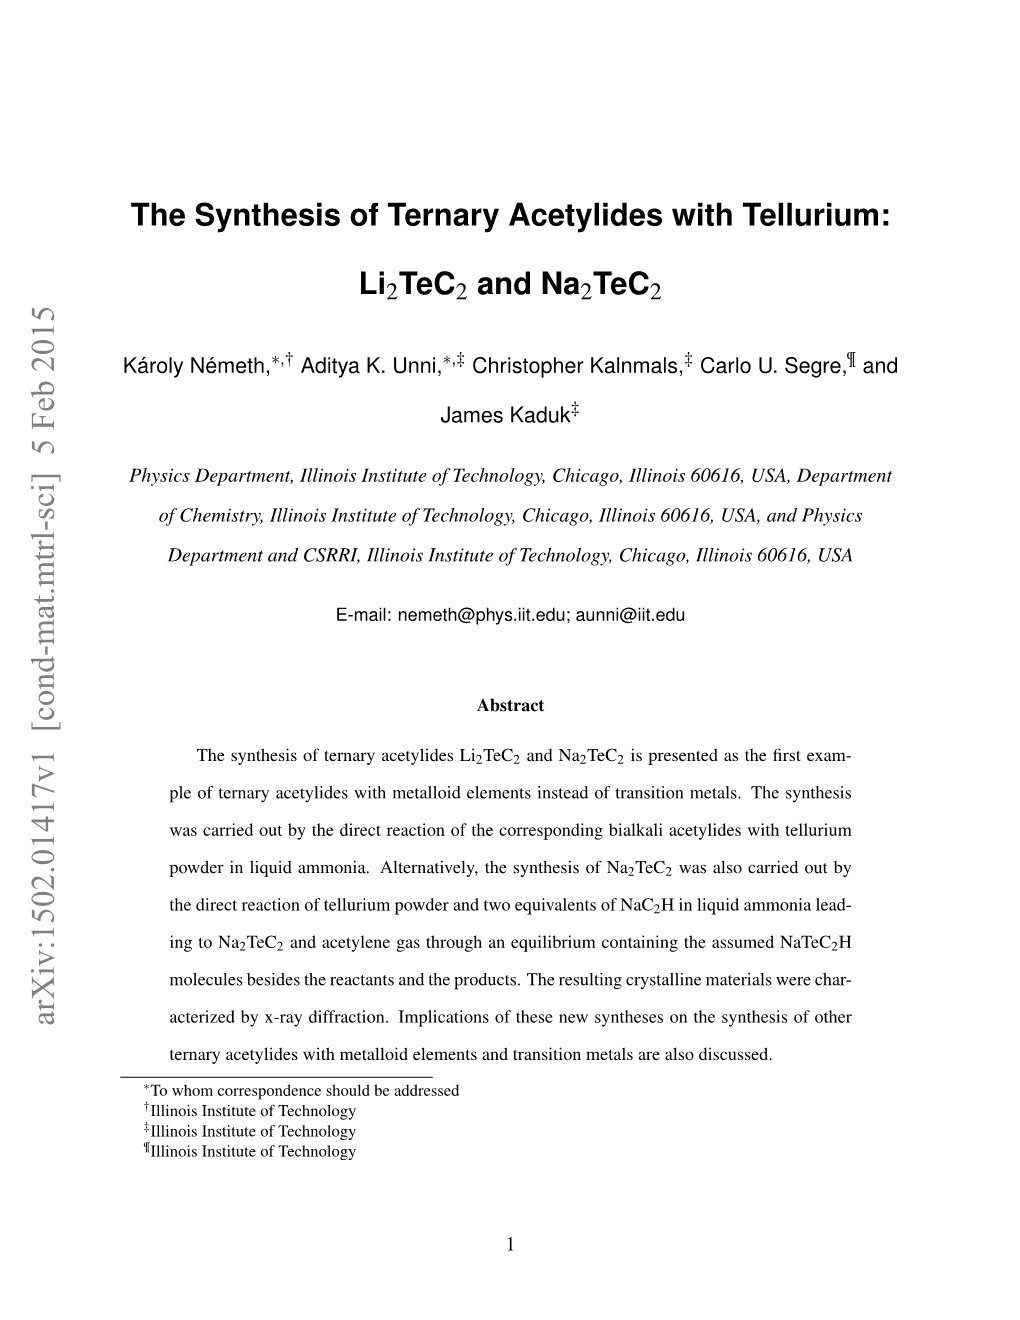 The Synthesis of Ternary Acetylides with Tellurium: Li2tec2 And